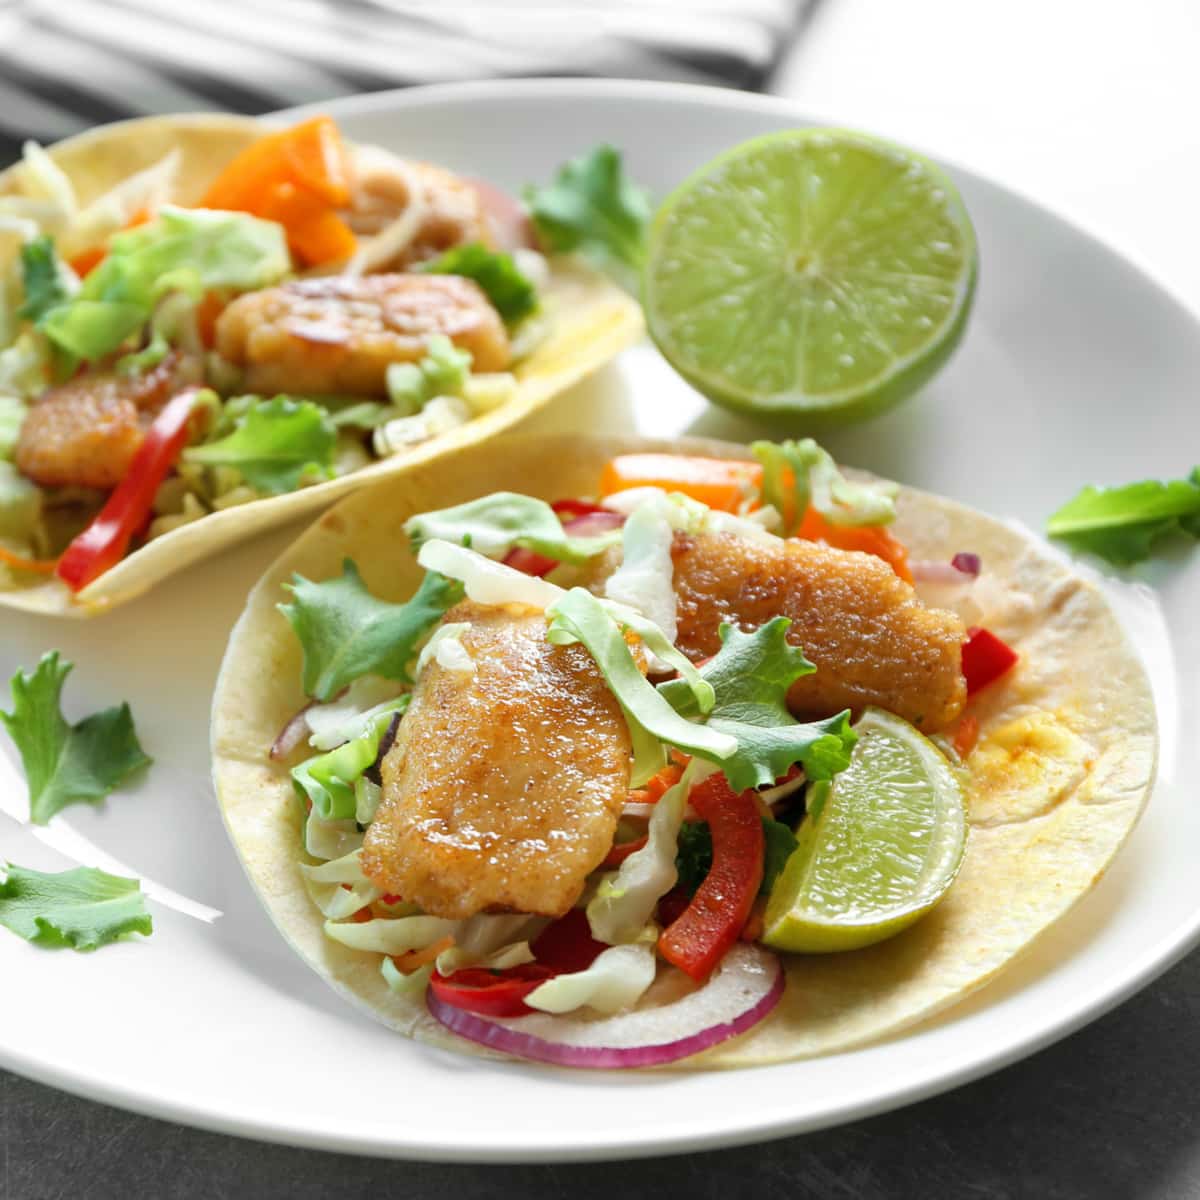 Fish Tacos with Sauce, coleslaw mix, onions and lime.